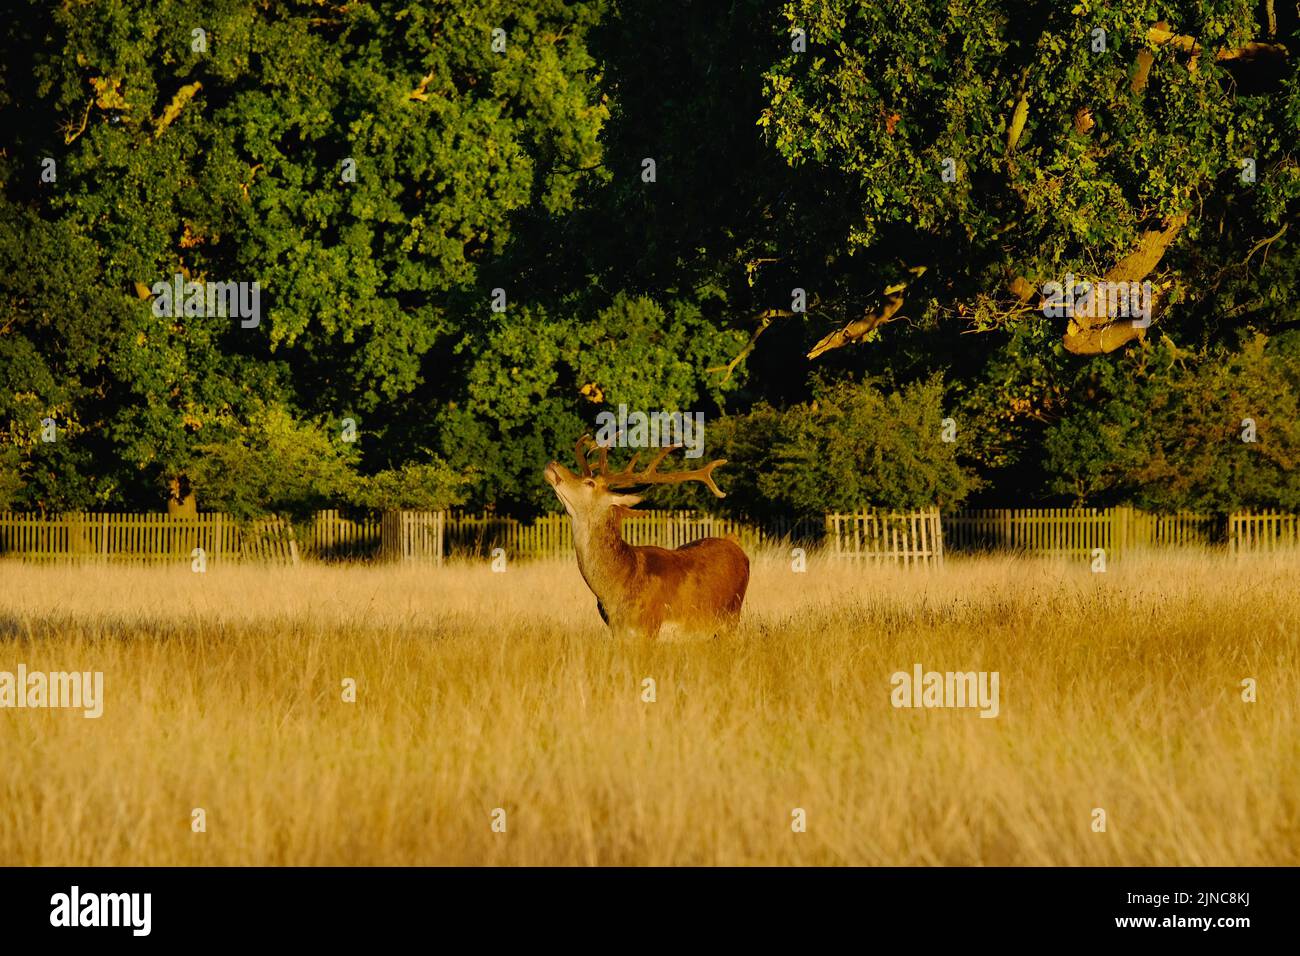 London, UK, 10th Aug, 2022.  A red deer Stag looks up at lush green tree leaves. After continuing hot, sunny conditions, with the driest July on record has left the park with large areas of yellowing grass. An Amber Extreme heat warning was issued by the Met Office this week as temperatures are expected to reach mid-30 degrees celsius.  Credit: Eleventh Hour Photography/Alamy Live News Stock Photo